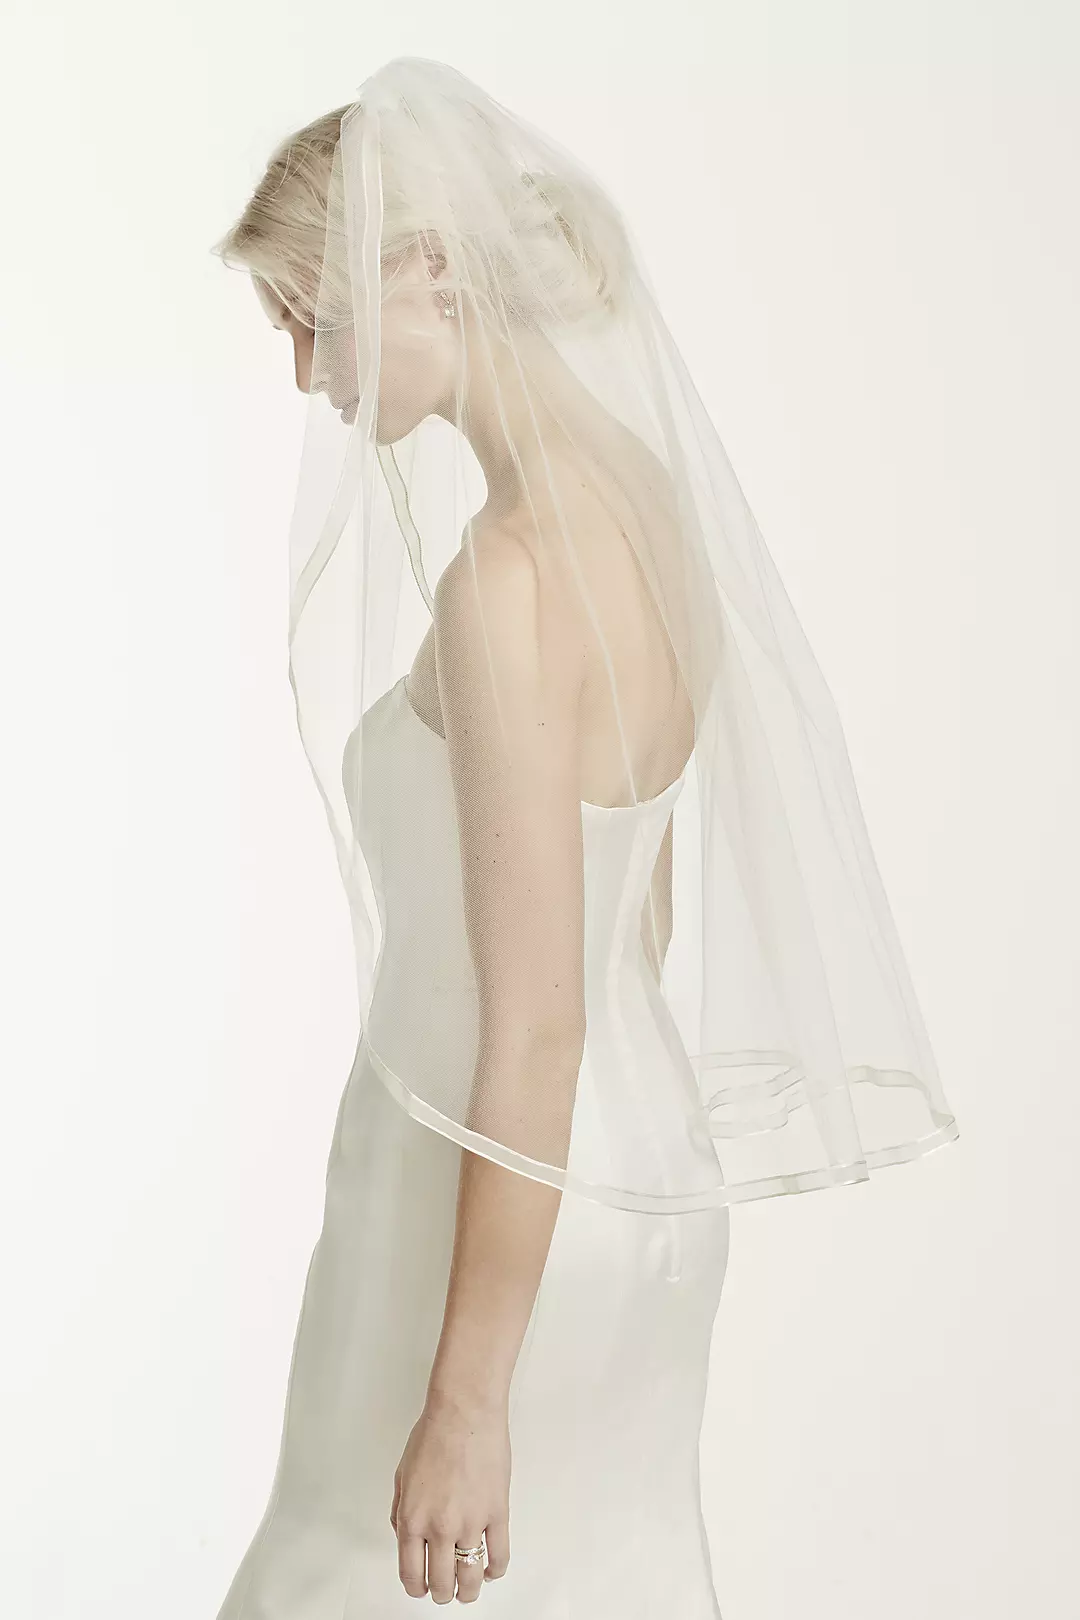 One Tier Mid Veil with Organza Ribbon Edge Image 3